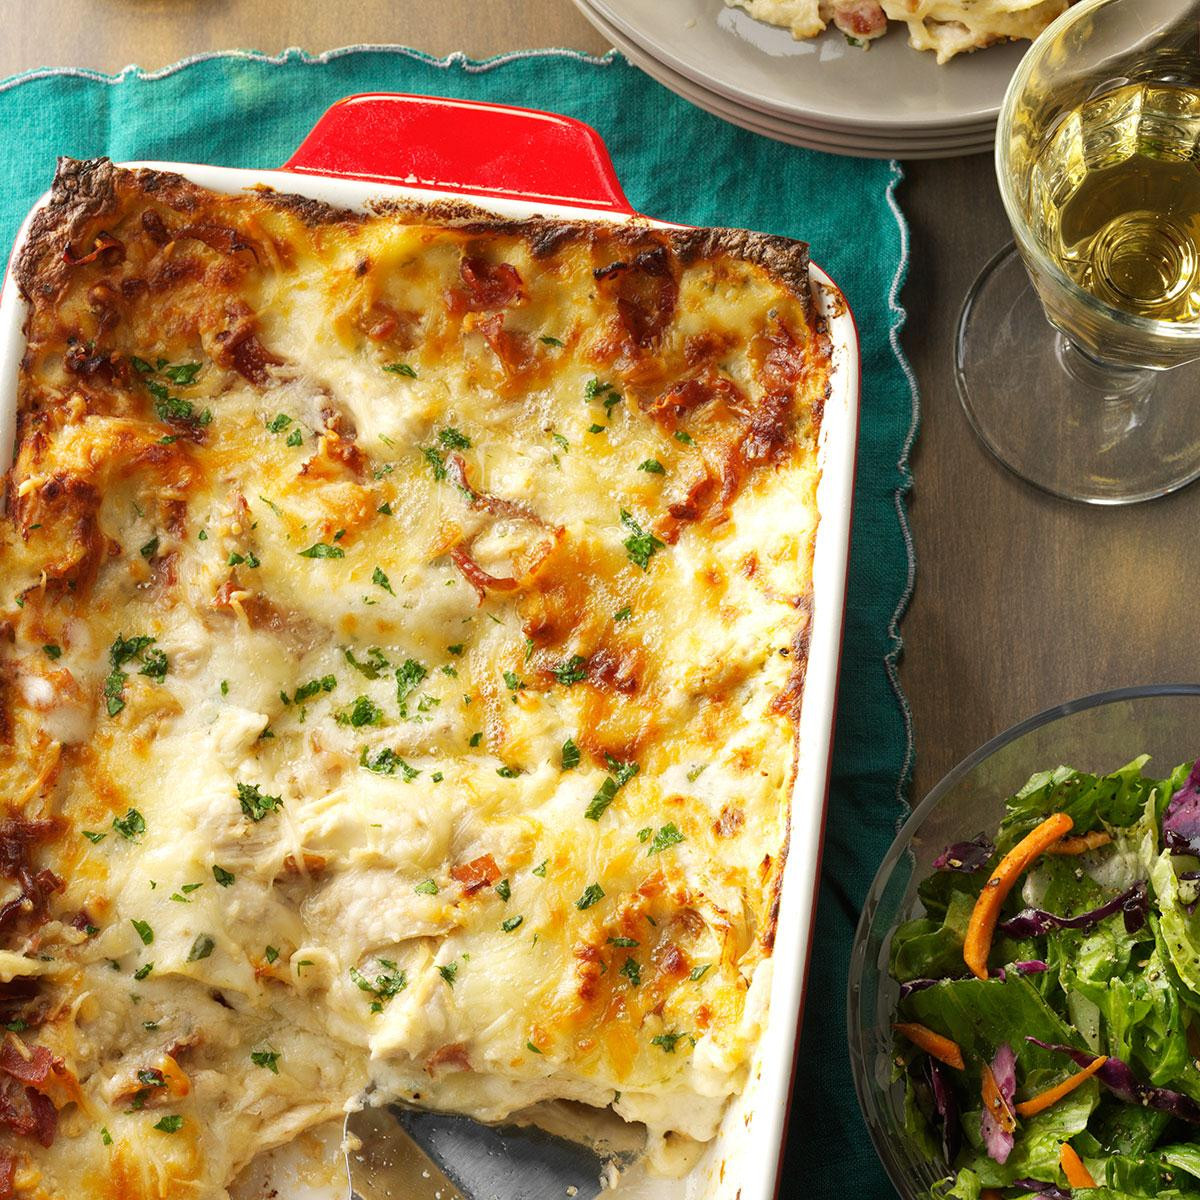 21 Of the Best Ideas for Christmas Eve Dinner Recipes Home, Family